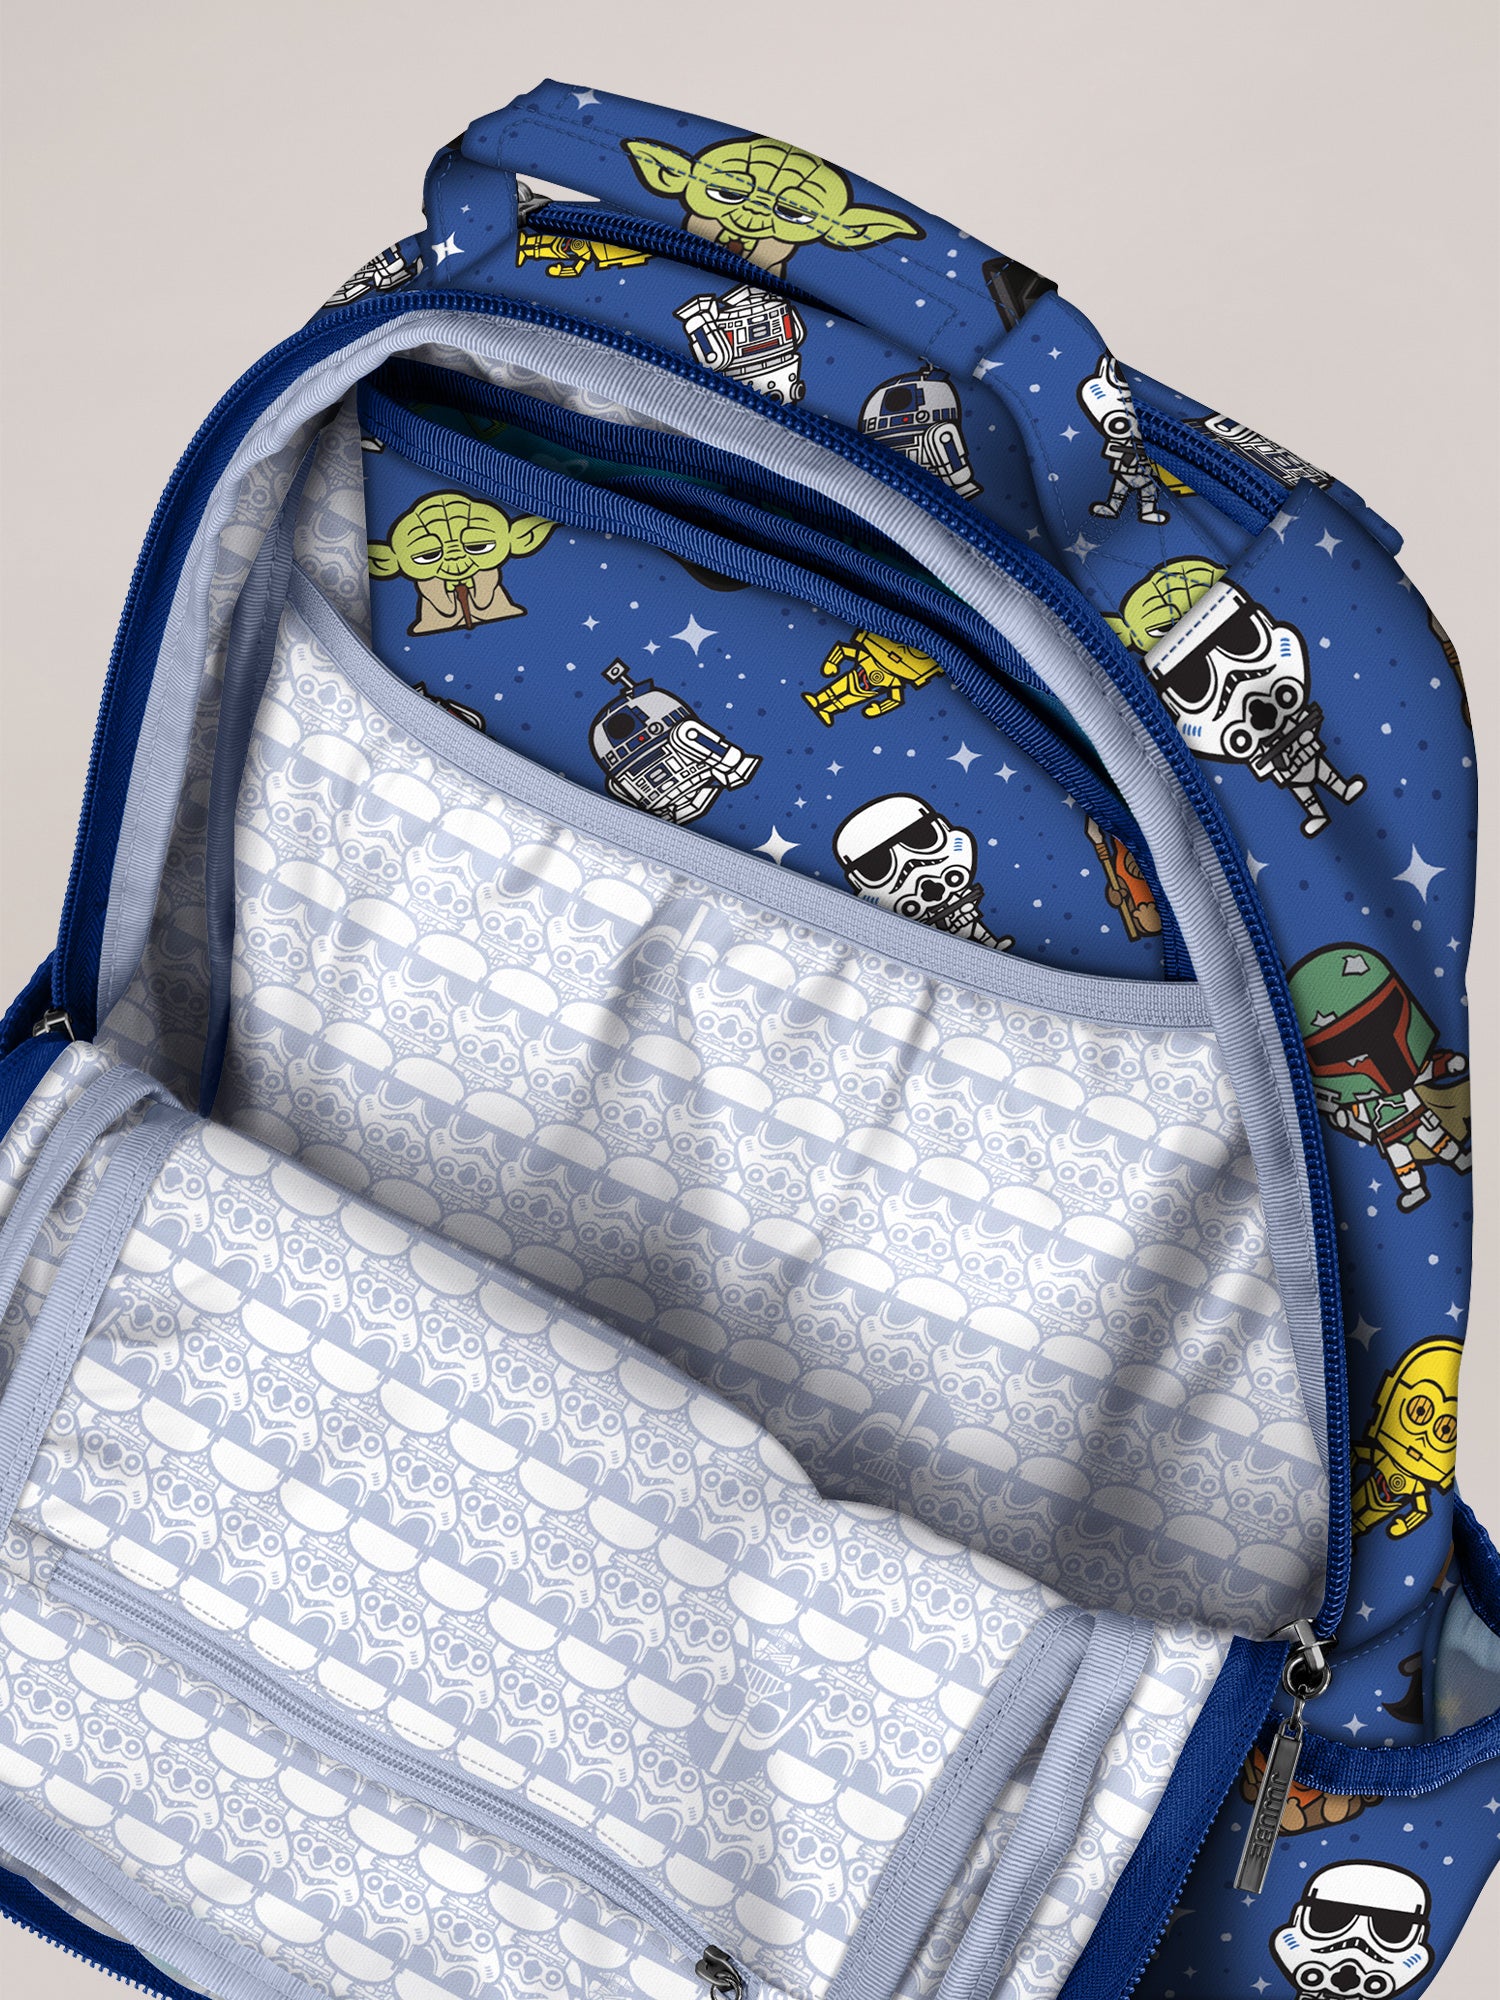 Image with a pattern of adorable STAR WARS characters traveling through a galaxy of stars